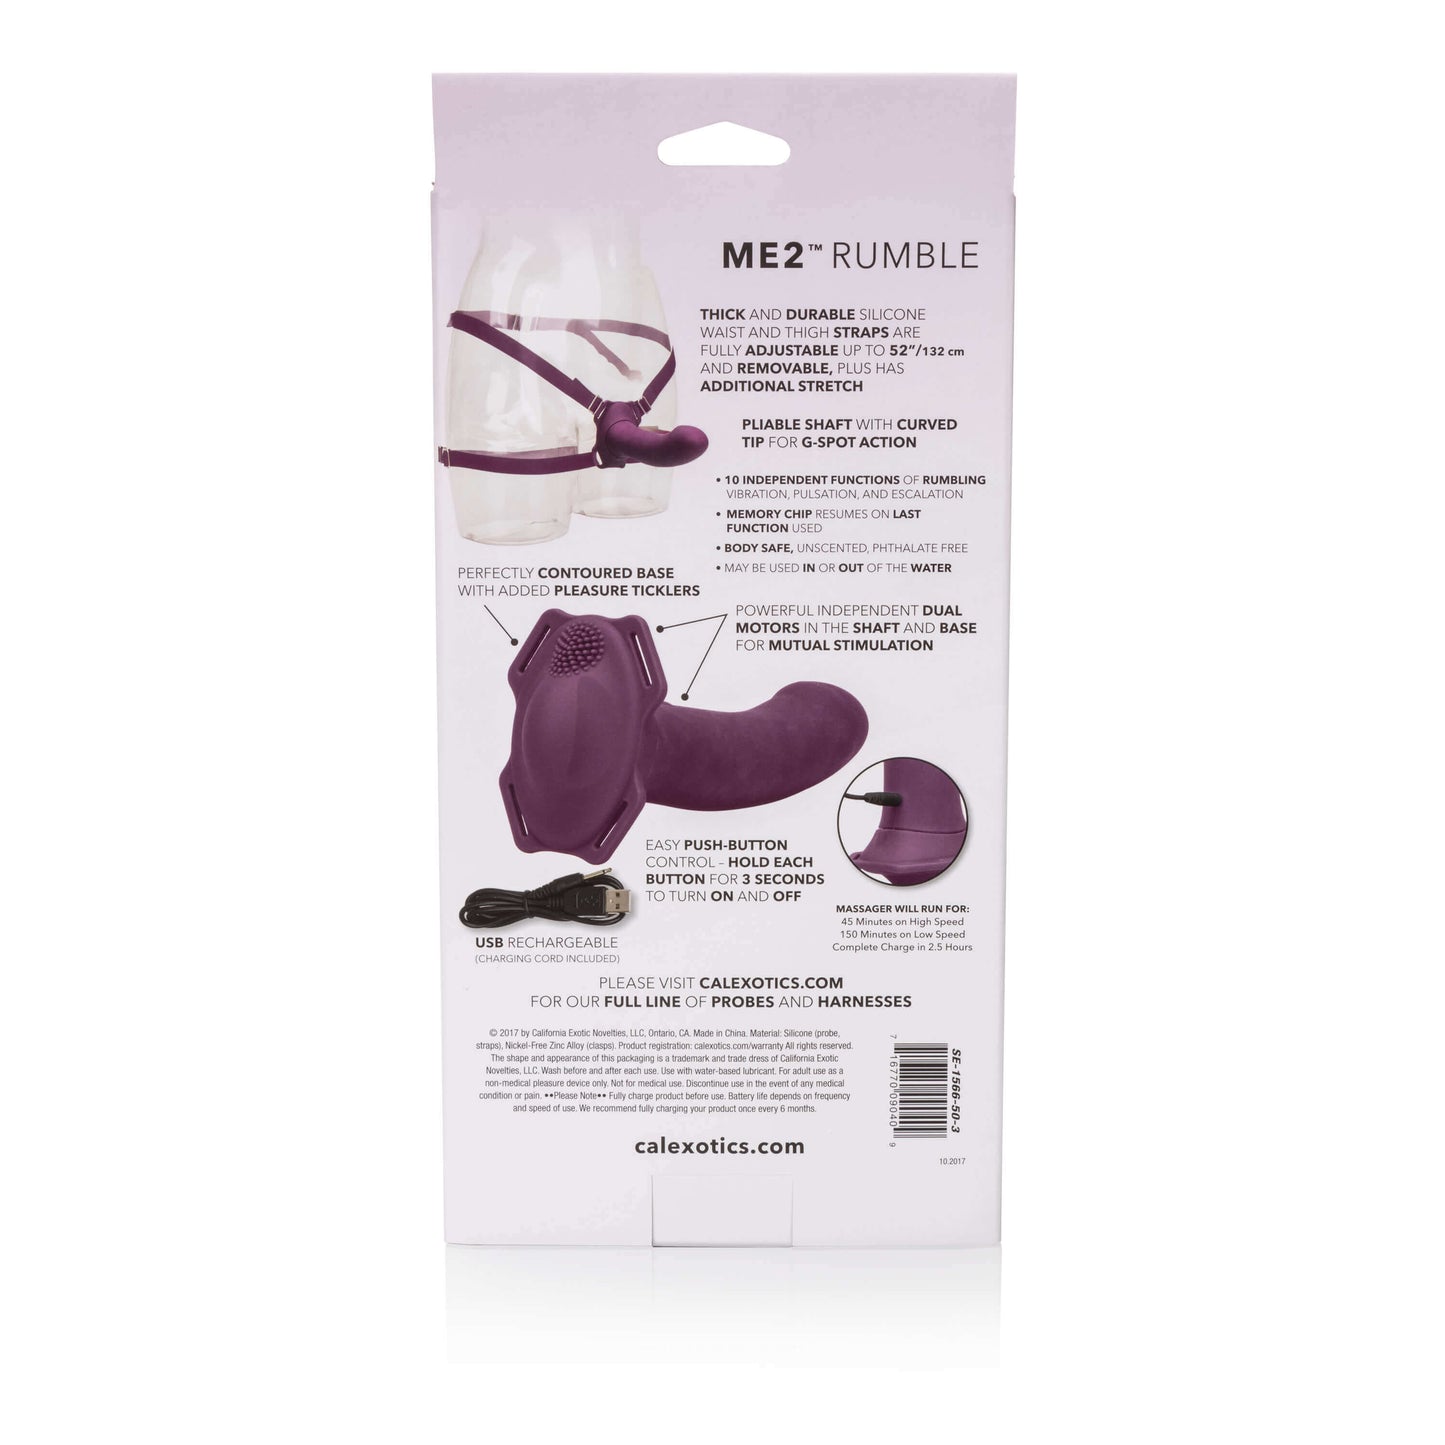 Package details of the Me2 Rumble Vibrating Dildo and Strap-On - CalExotics - The Bigger O online sex toy shop USA, Canada & UK shipping available